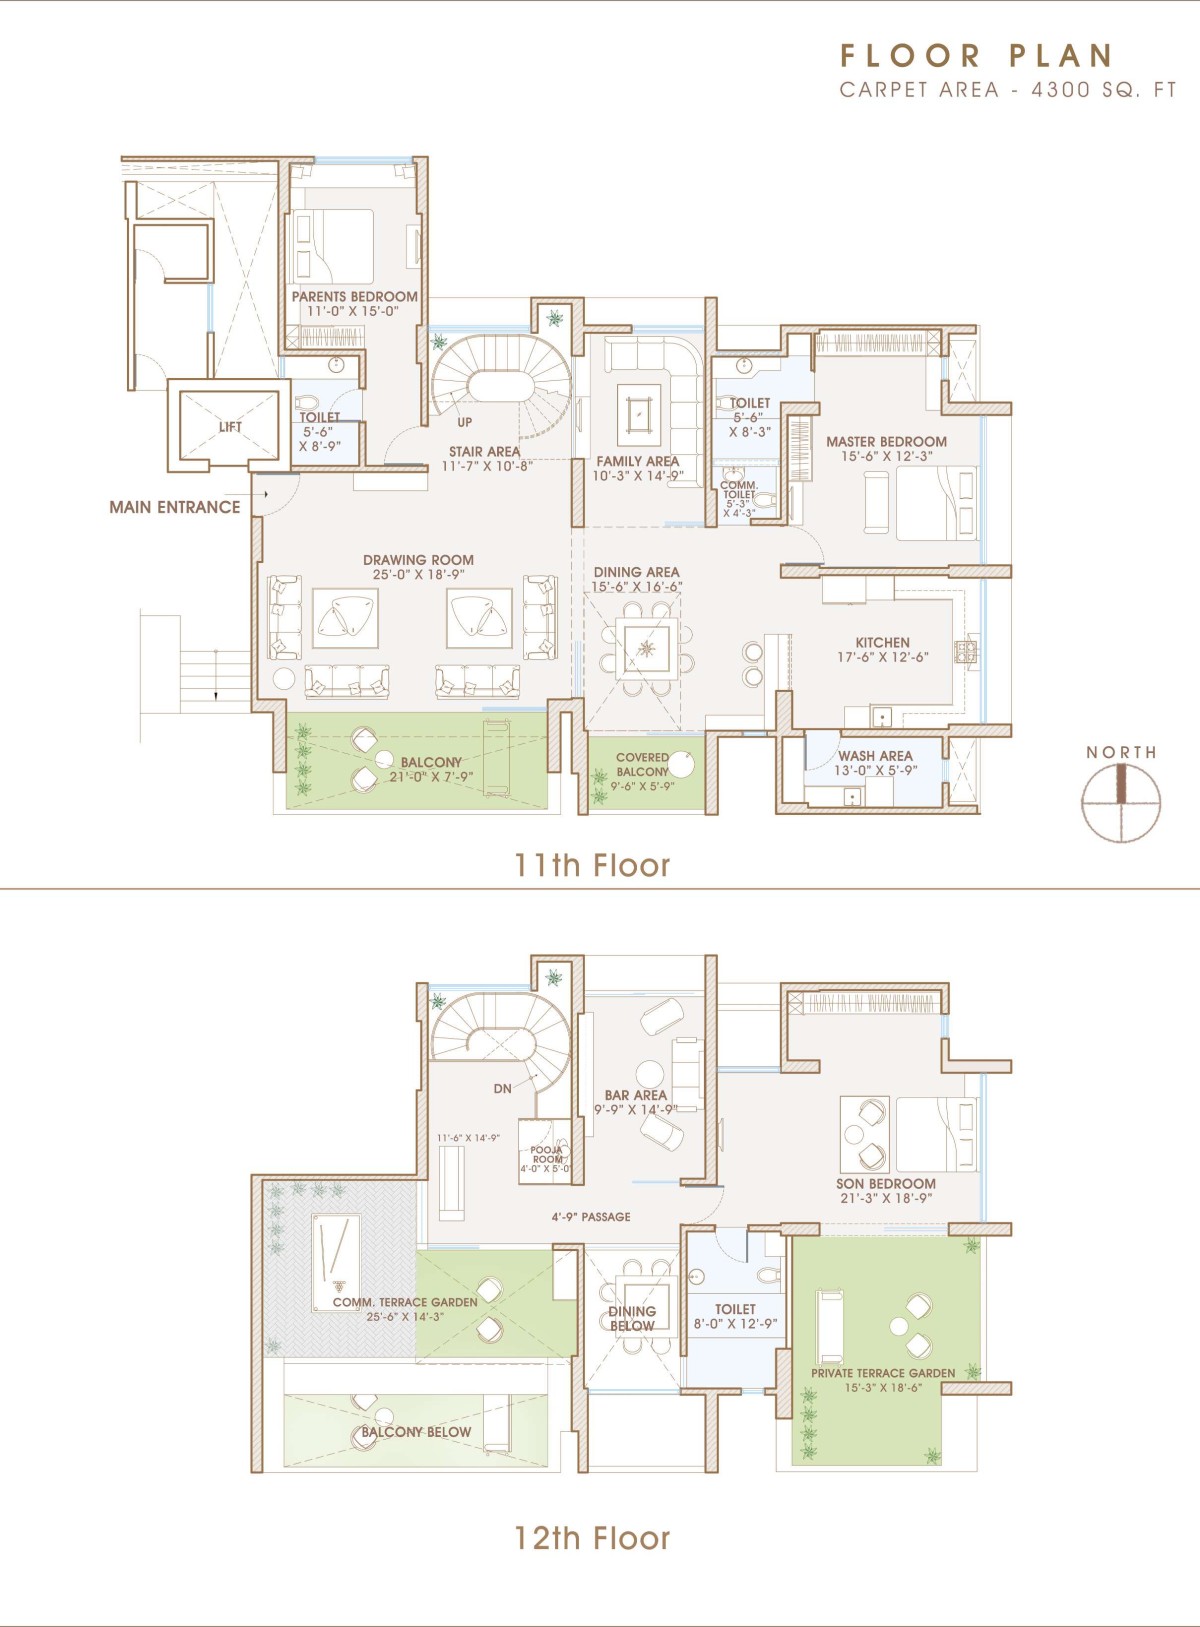 Plan of Ultra-Modern Luxurious Penthouse by Prashant Parmar Architect - Shayona Consultant